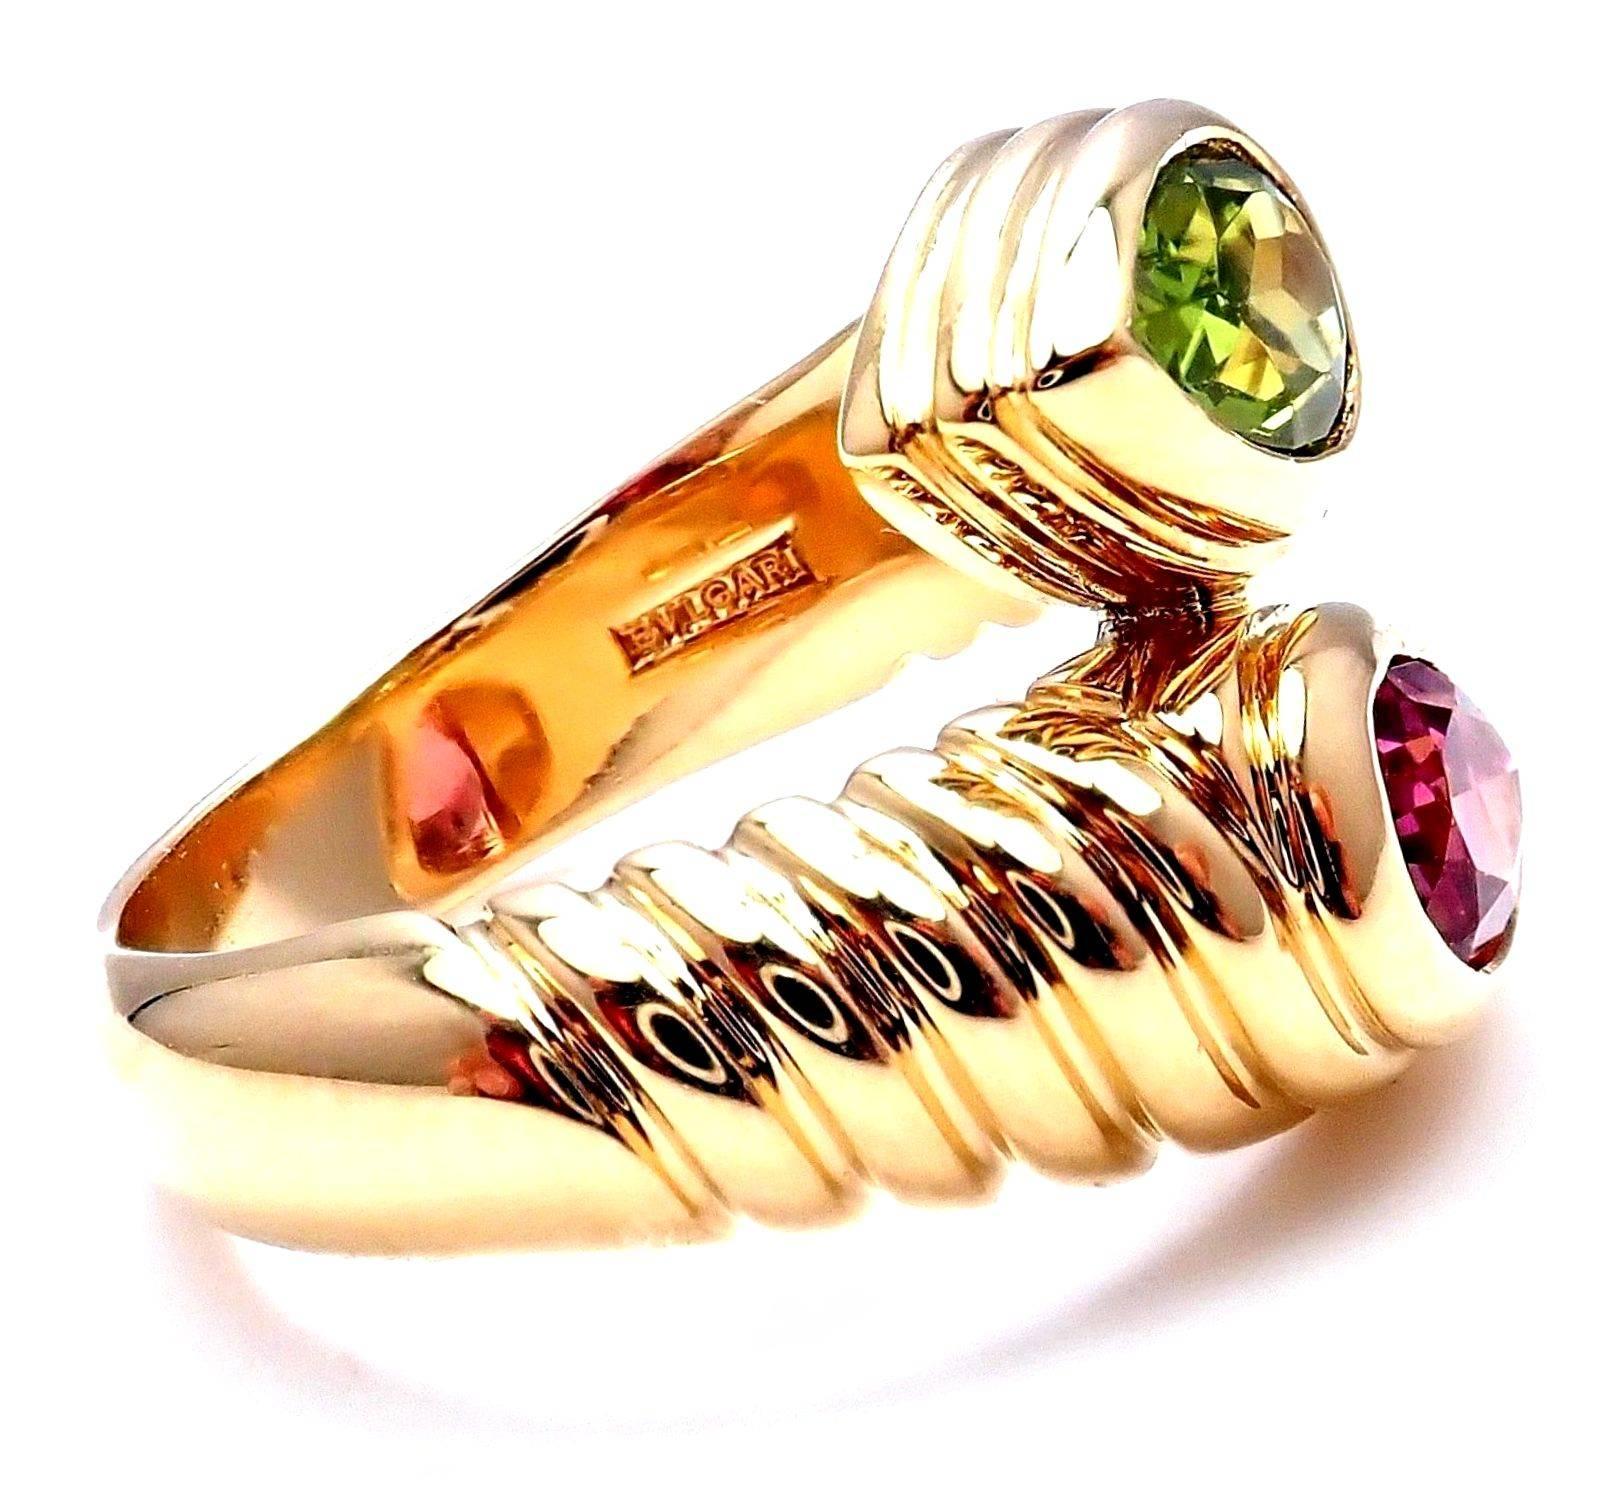 18k Yellow Gold Pink And Green Tourmaline Doppio Bypass Band Ring By Bulgari. 
With 1 Pink Tourmaline 5mm x 7mm
1 Green Tourmaline 5mm x 7mm
Details:
Ring Size: 6.5 (resize available)
Width: 15mm
Weight: 11.4 grams
Stamped Hallmarks: Bvlgari